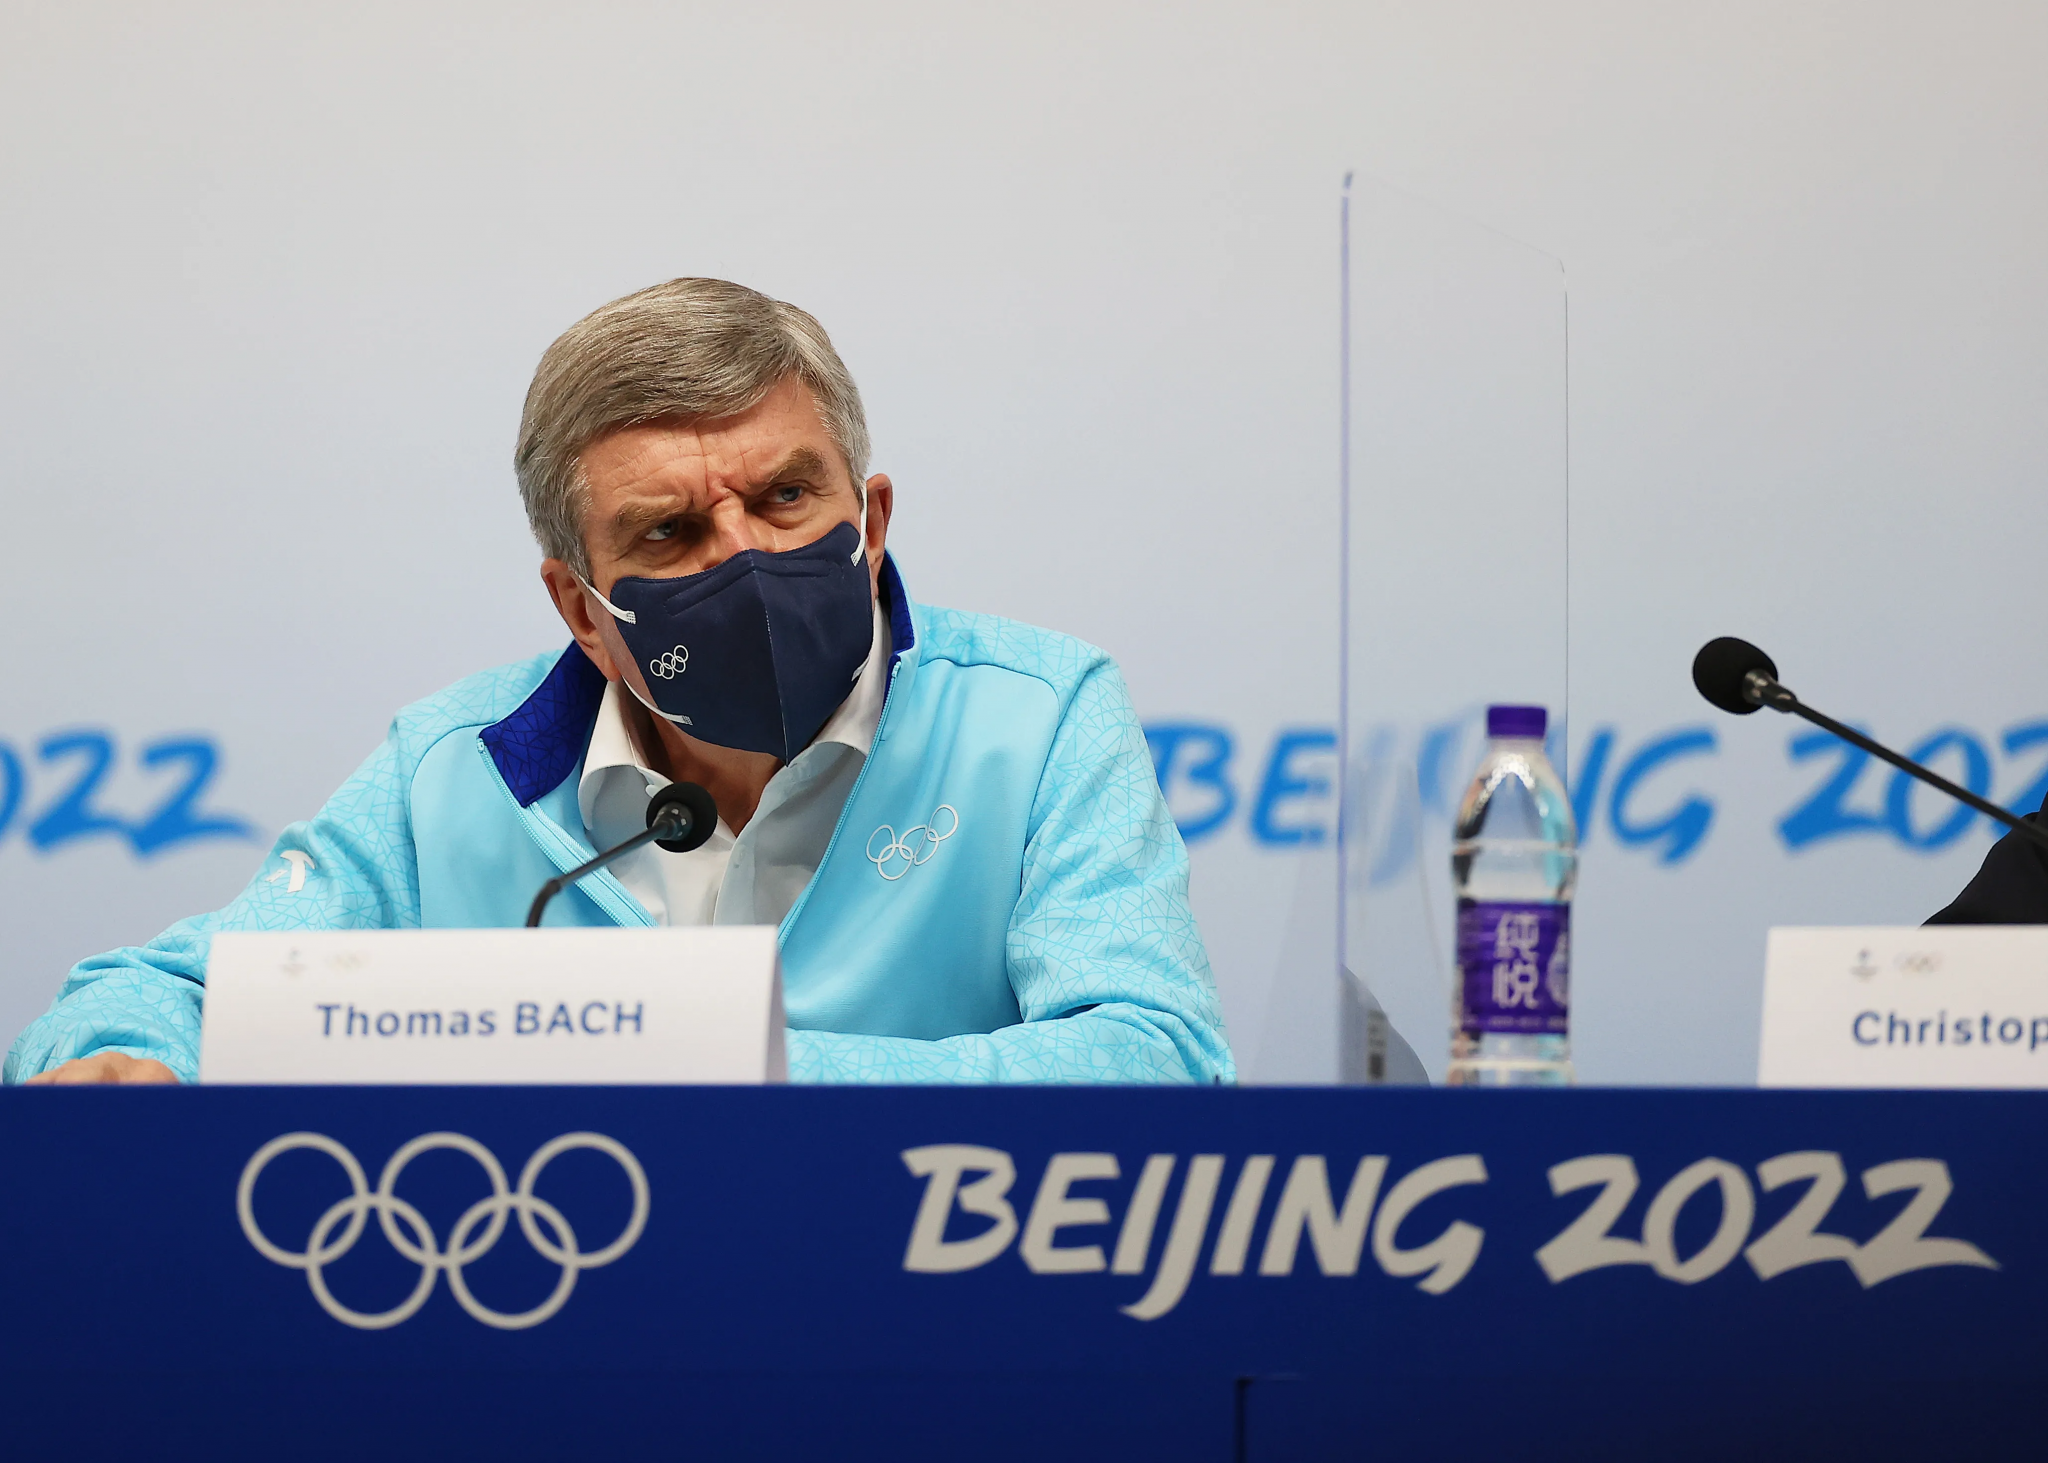 IOC President Thomas Bach claimed the treatment of Kamila Valieva at Beijing 2022 by her coaching team was 